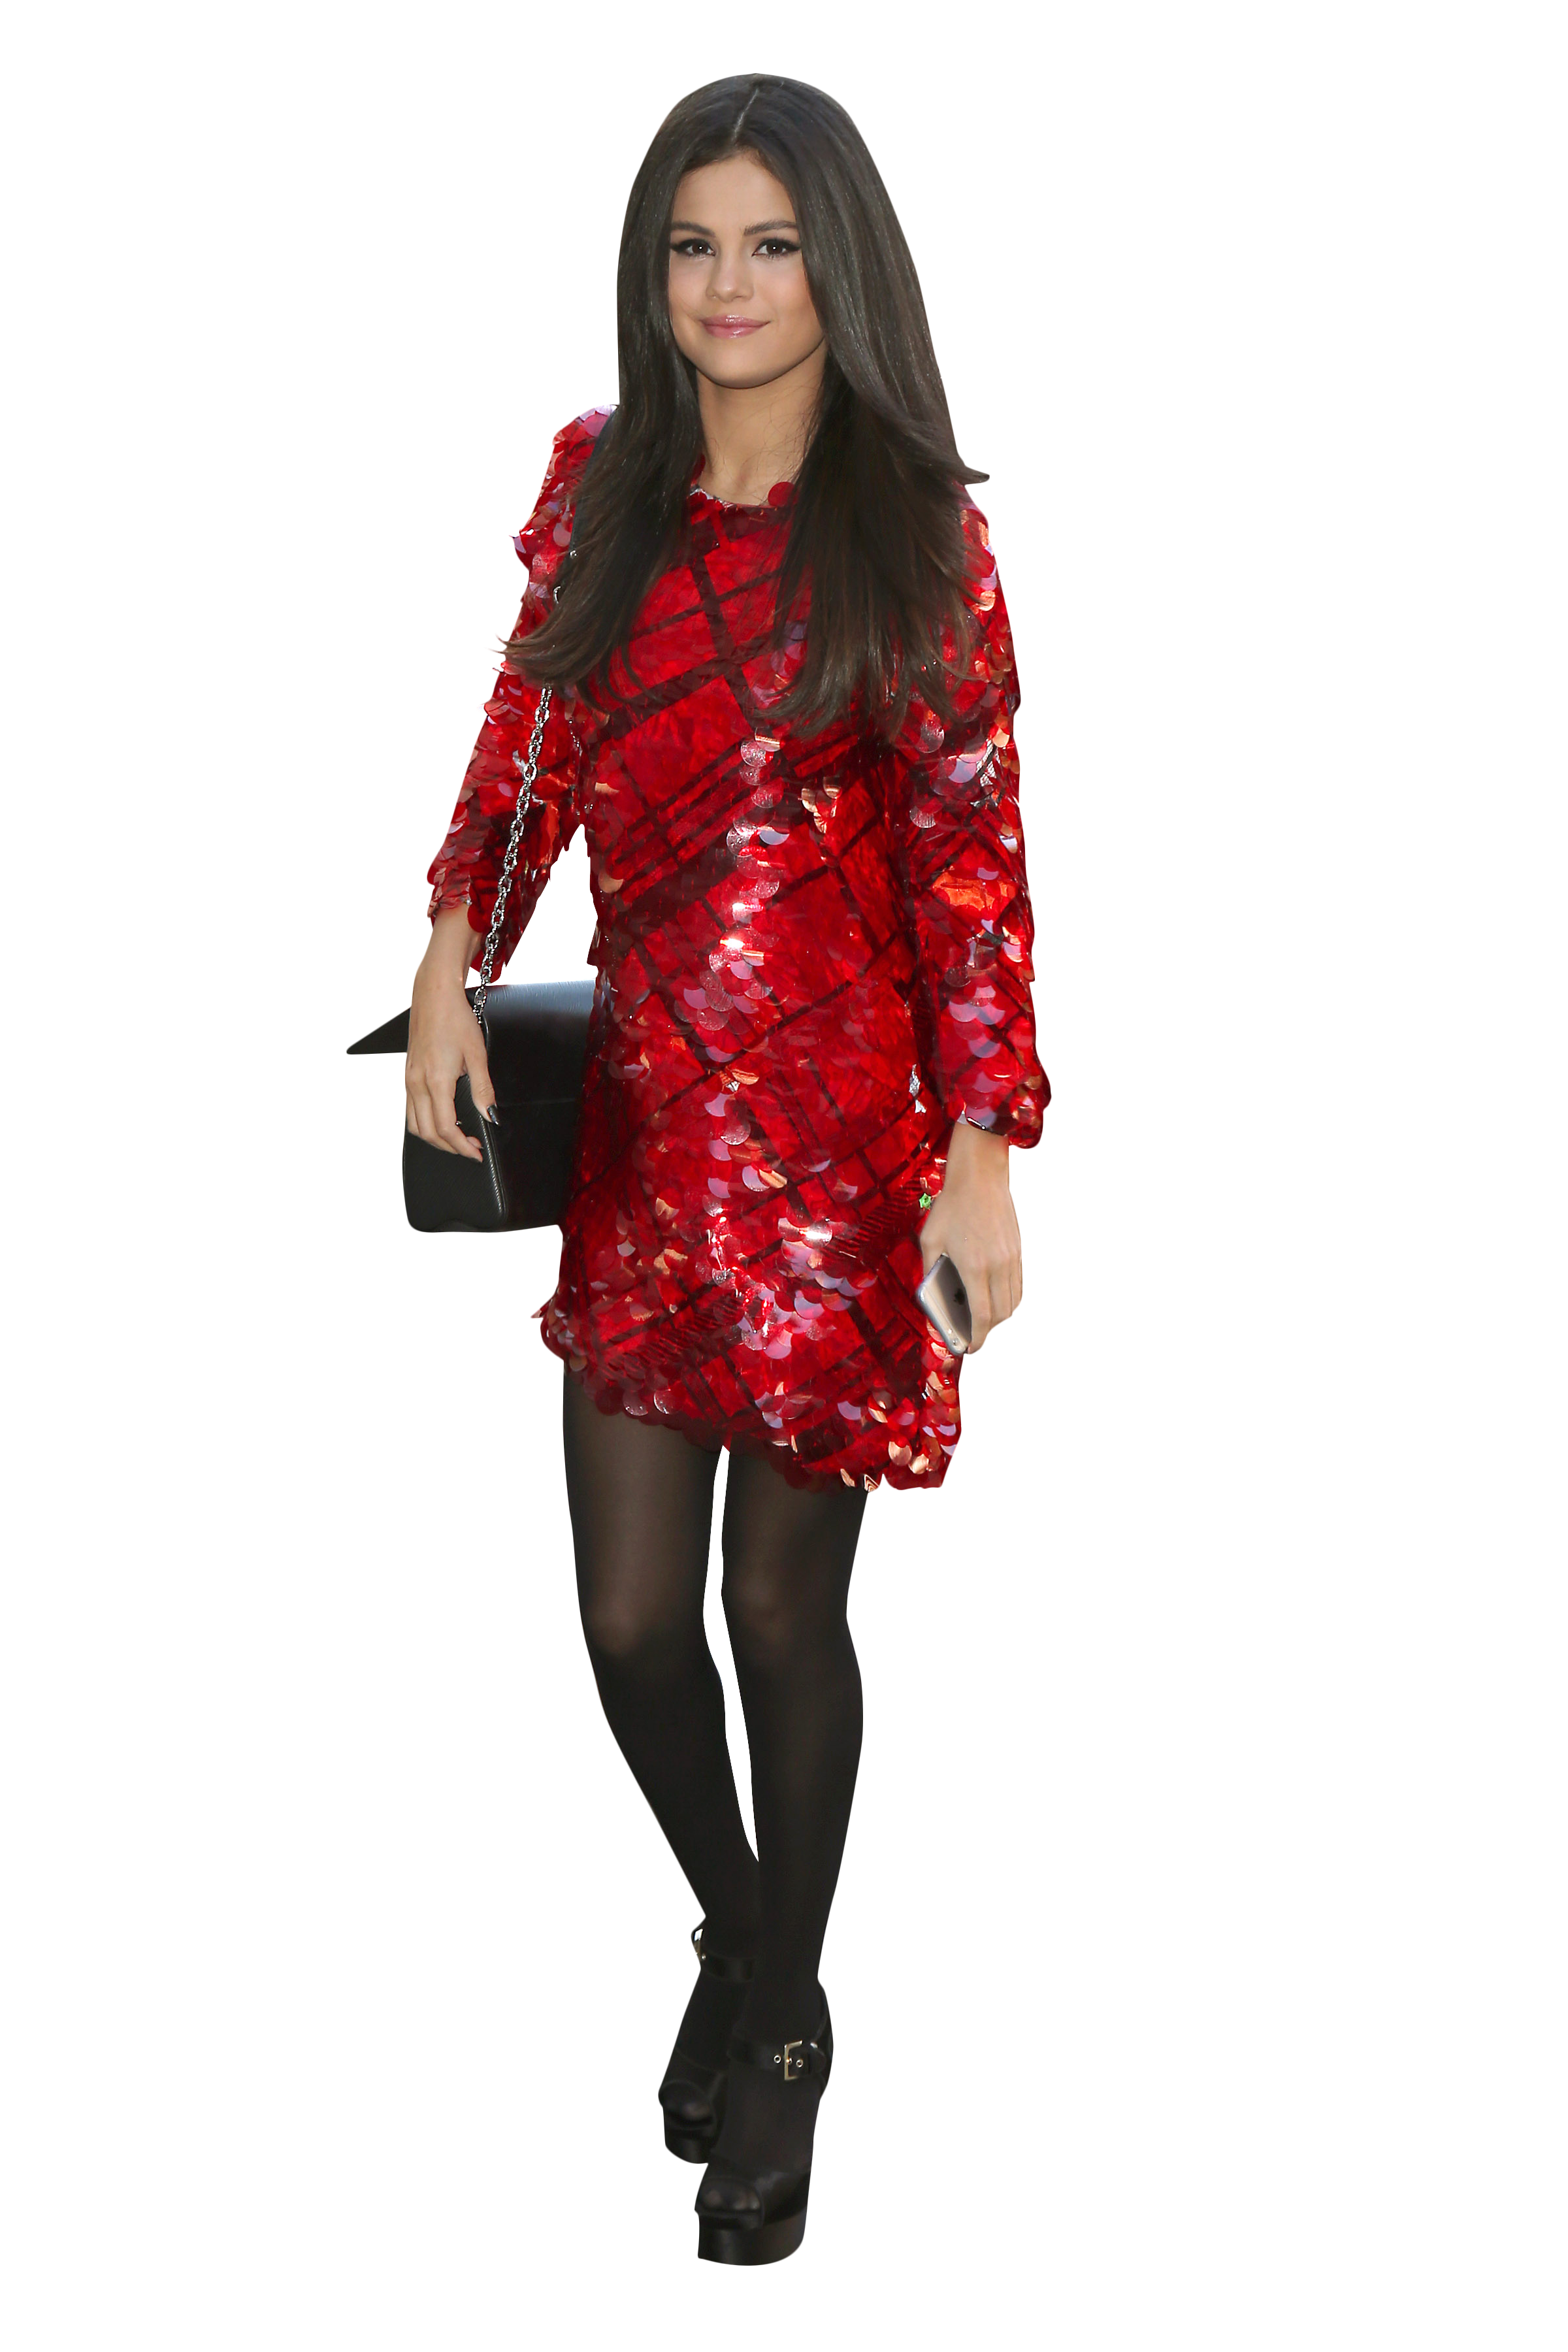 Selena Gomez in Red Dress and Black Pantyhose PNG Image